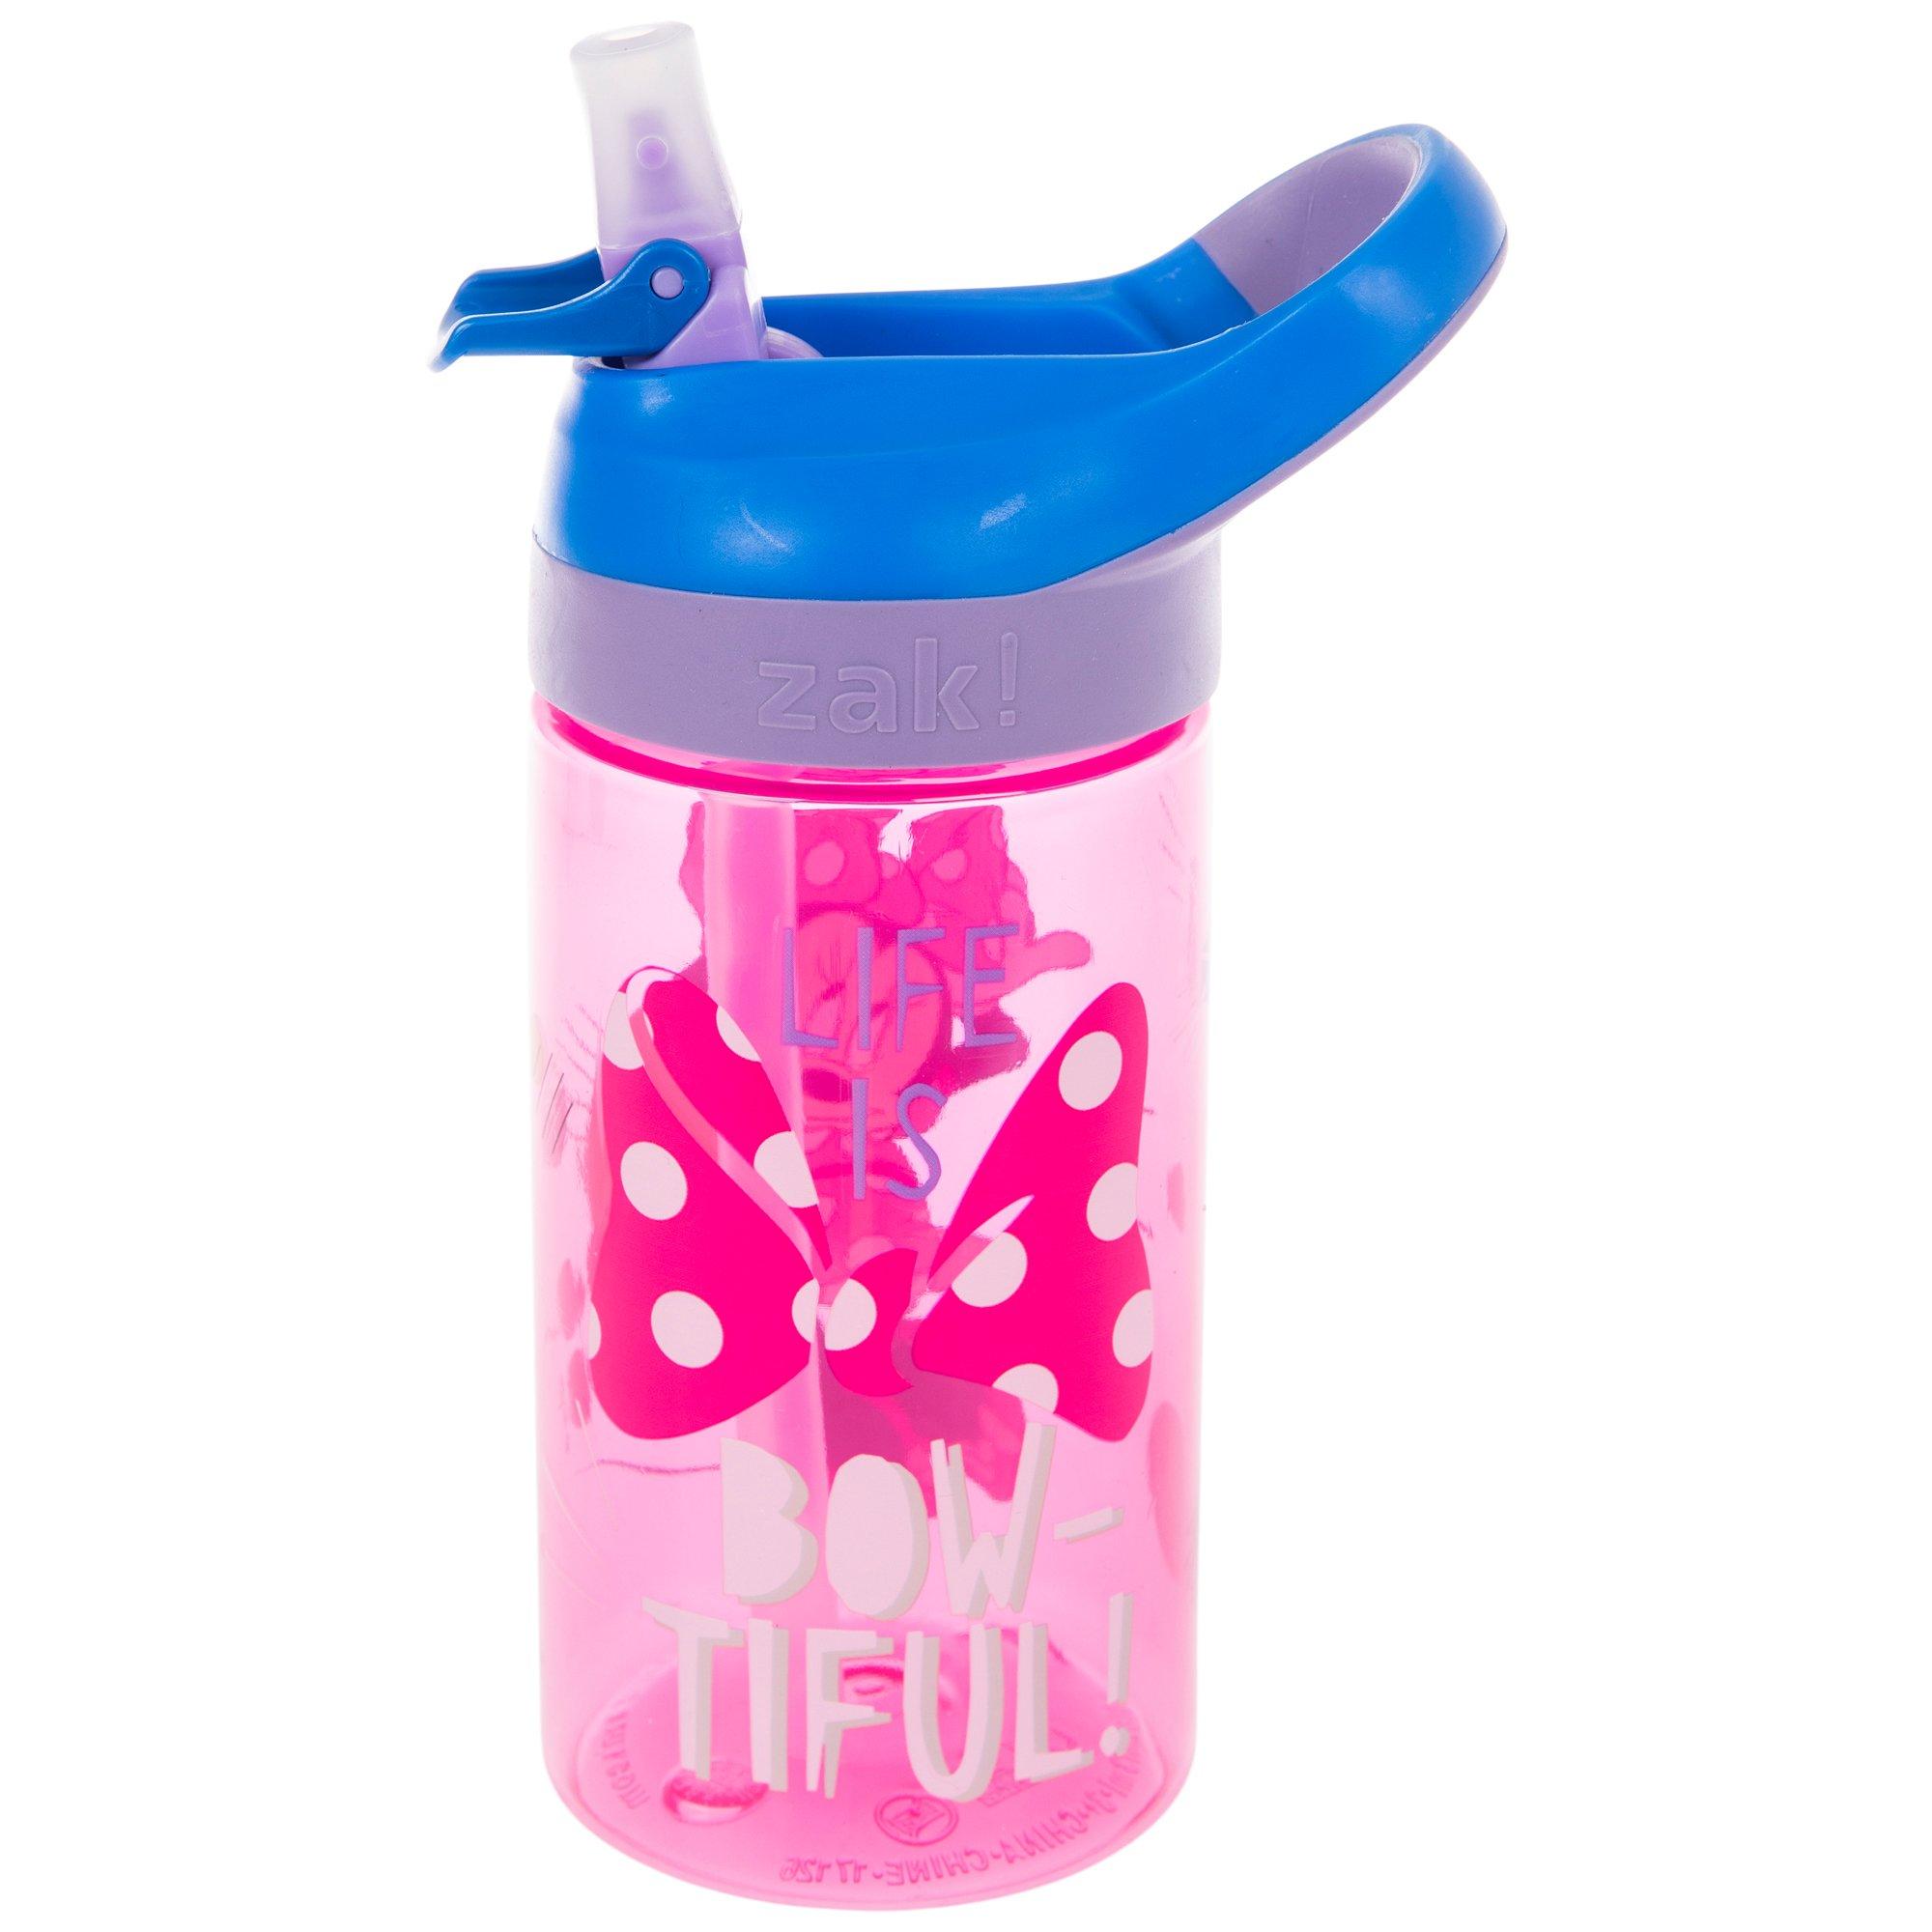 The First Years Take & Toss Disney Sippy Cups, Minnie Mouse, 10 oz, 3 Ct, 1  - Kroger